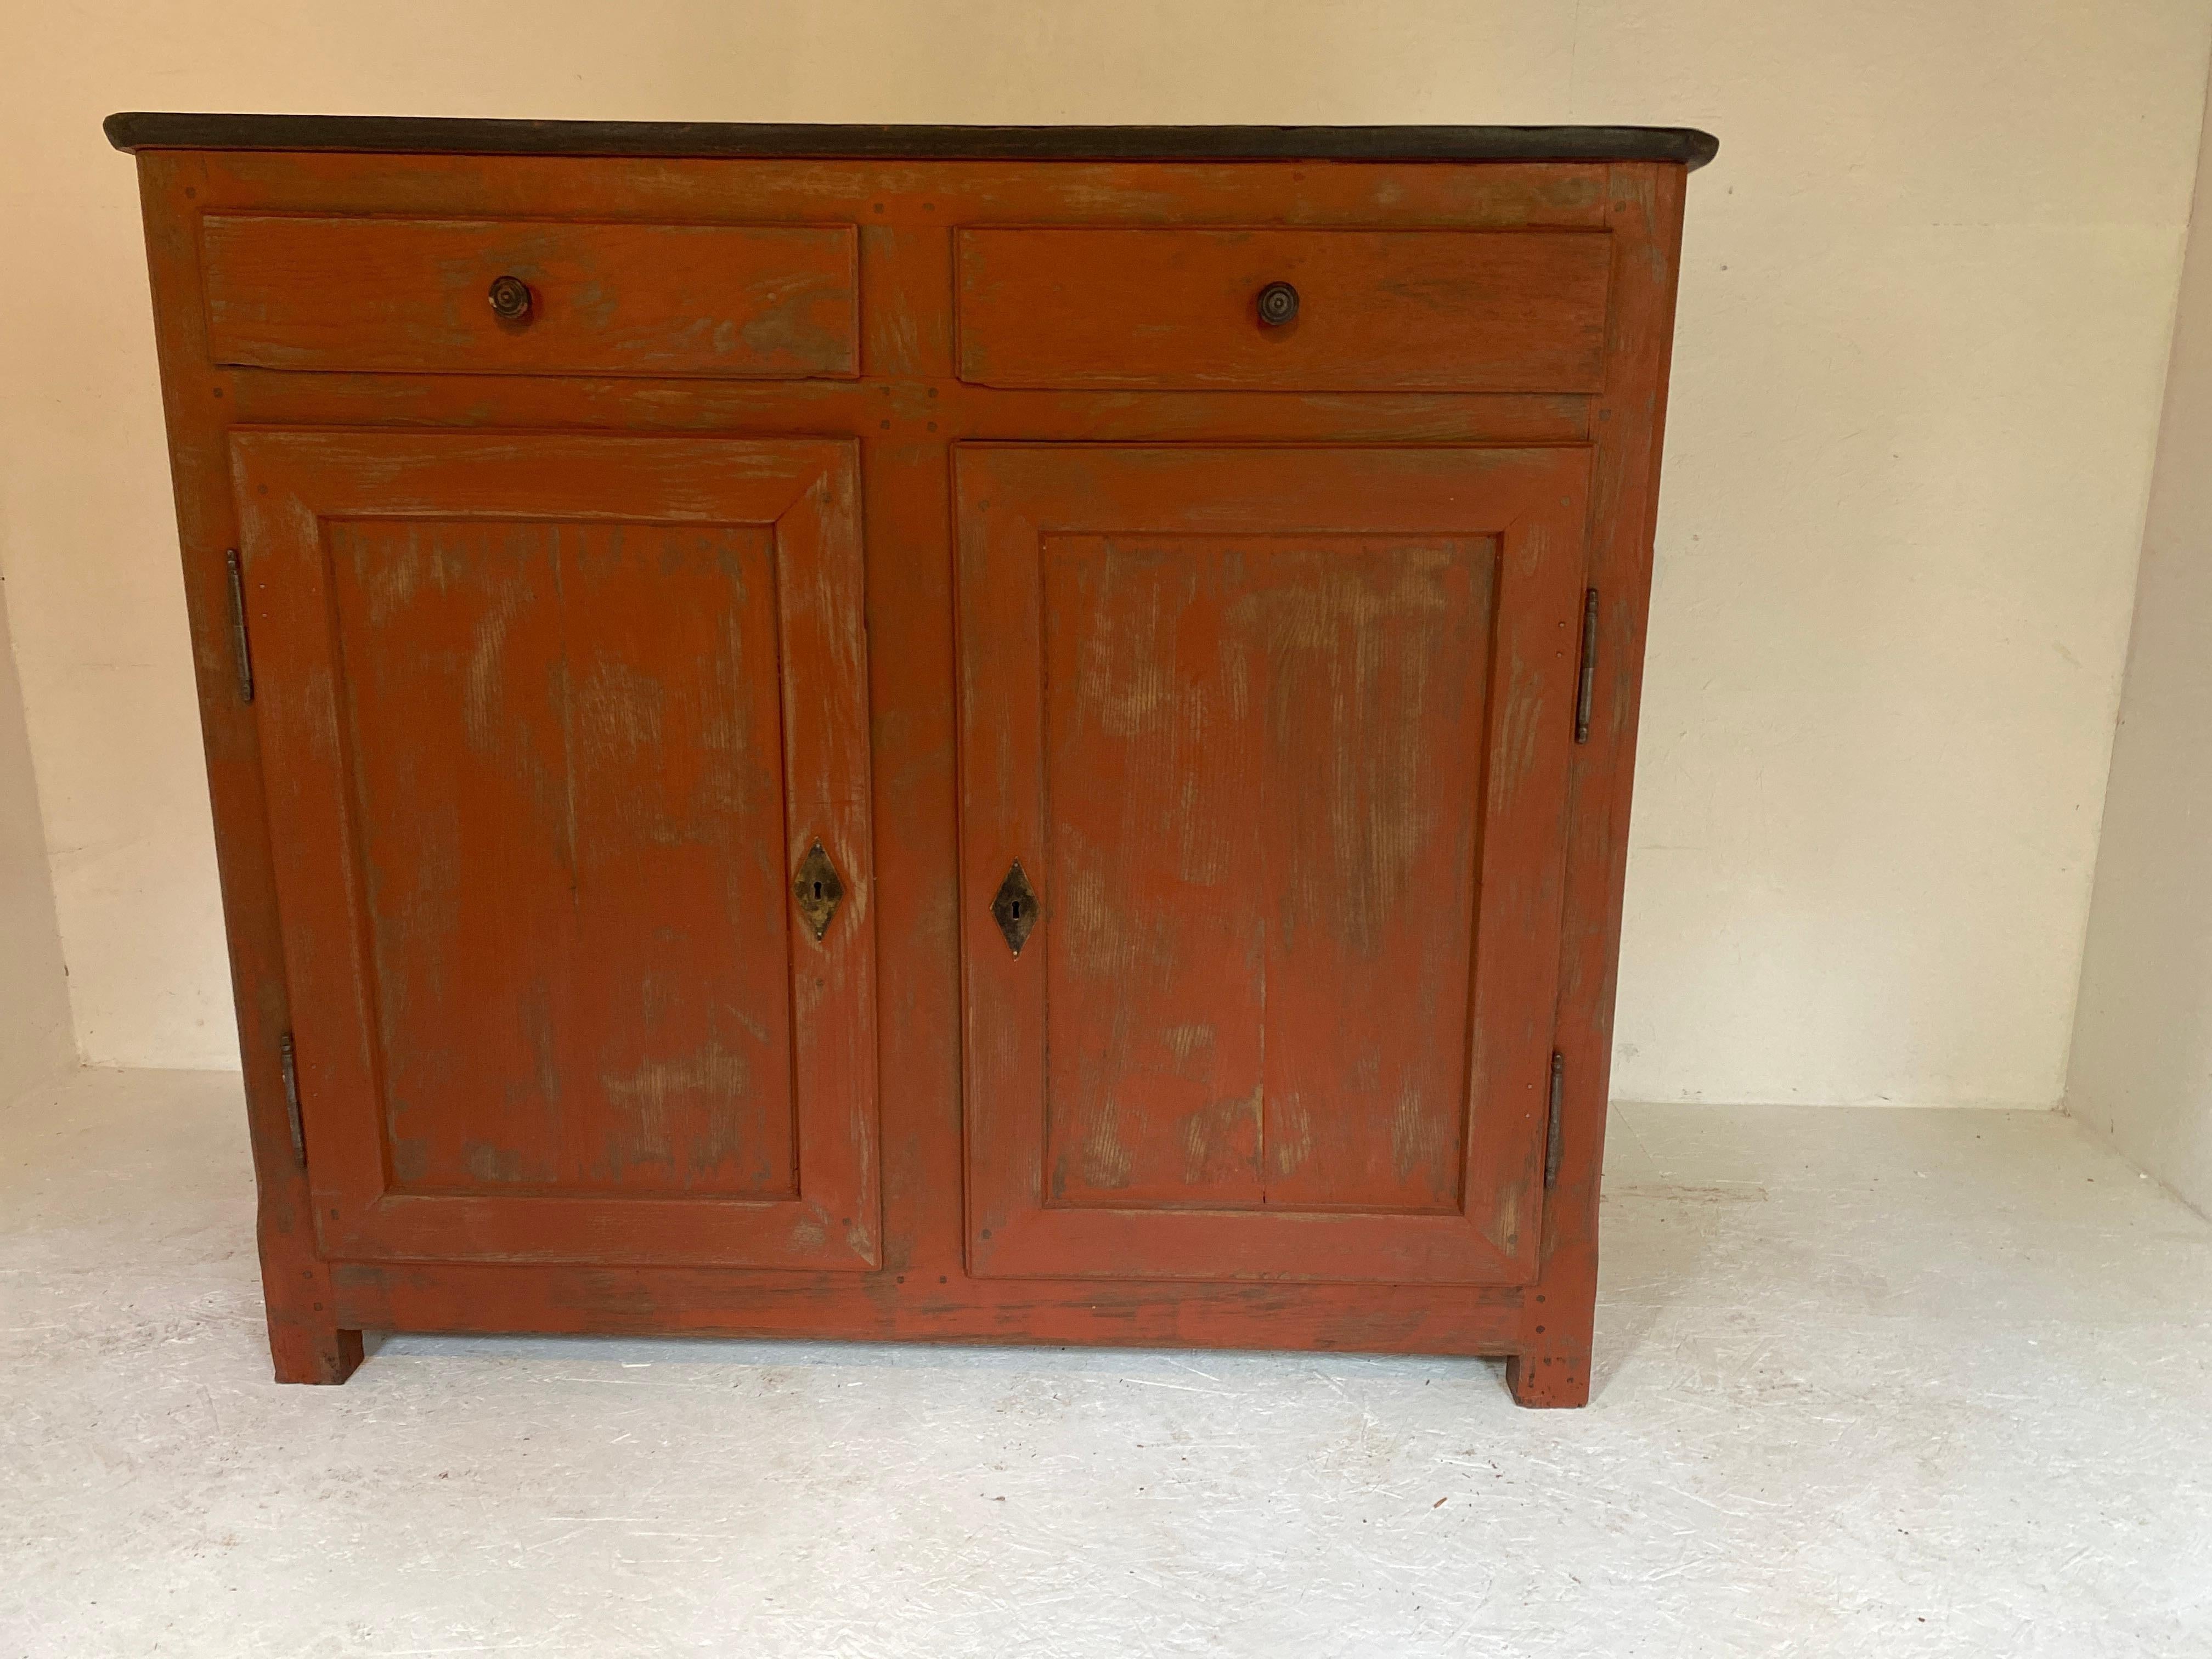 Magnificent sideboard dating from the 19th century from Italy in the Tuscan countryside two wide doors with an intermediate upright surmounted by two drawers very pretty polychrome red orange and dark gray tablet inside a board and a large storage